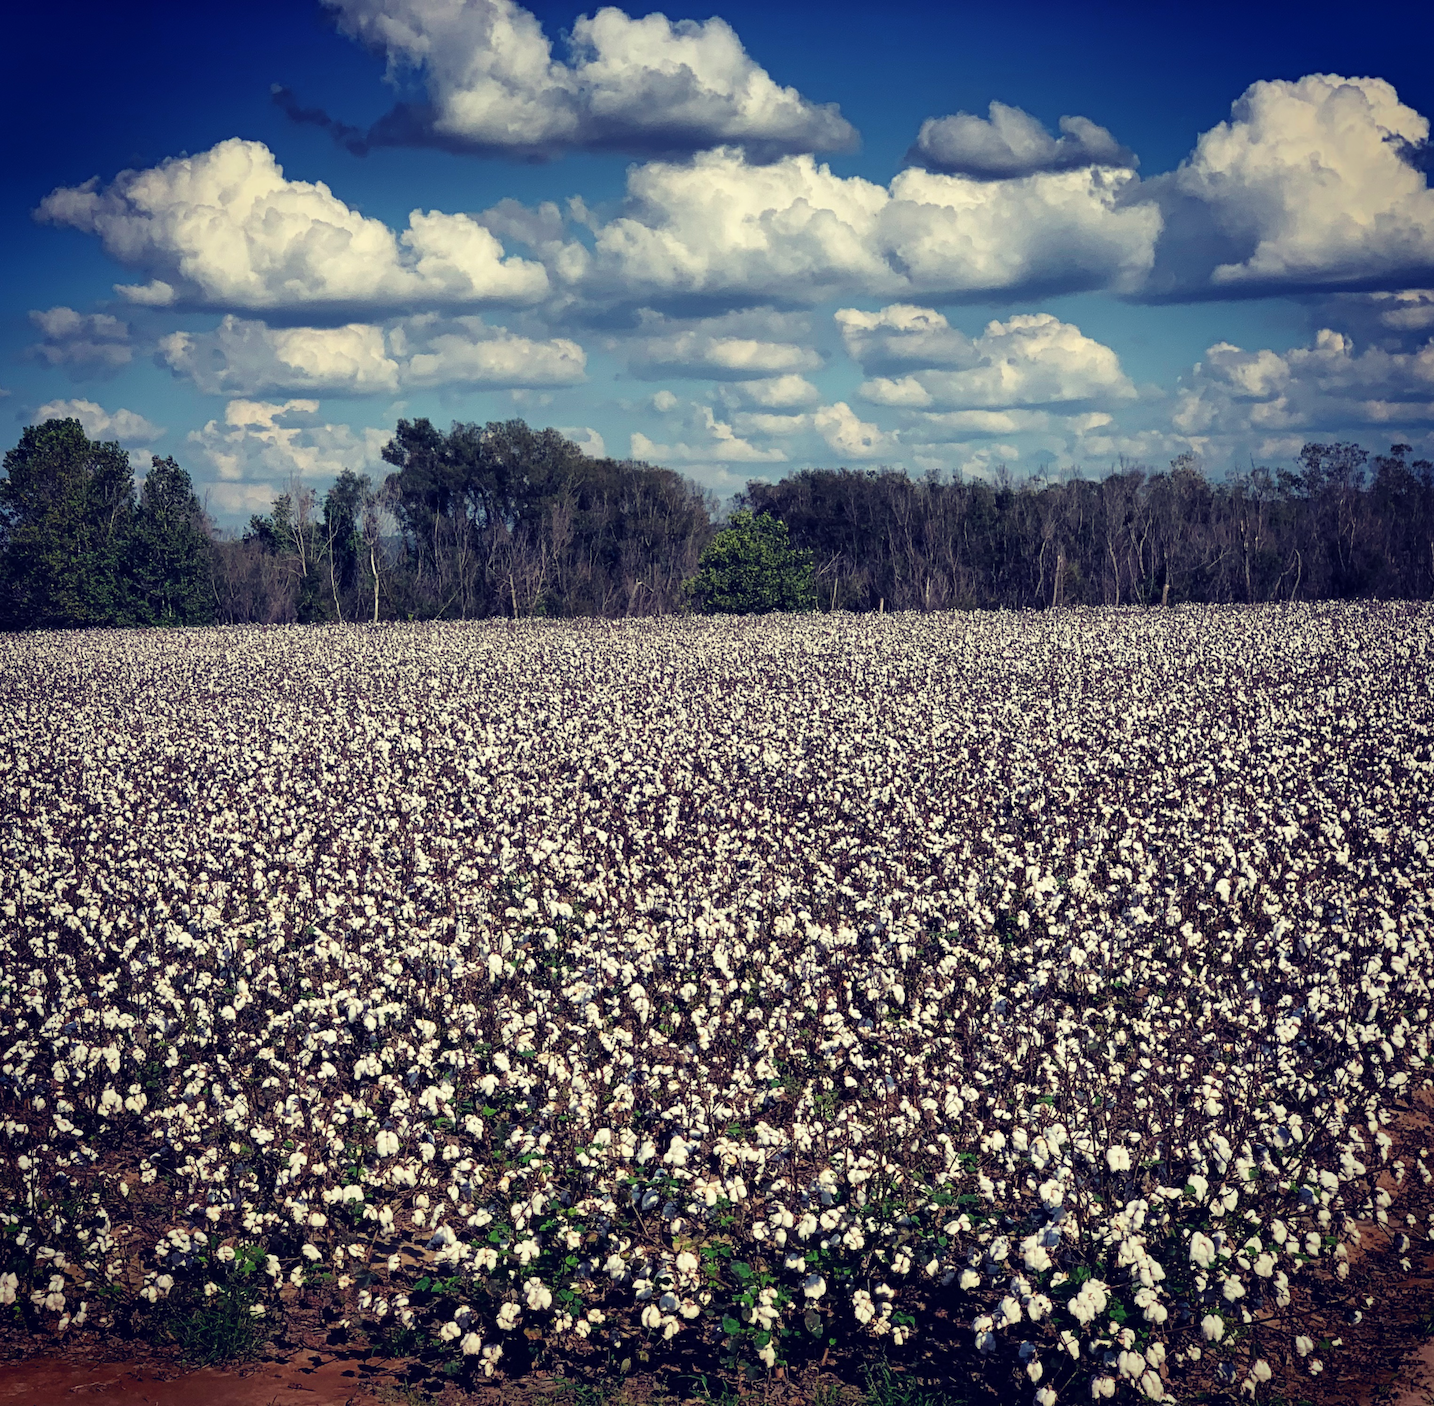 Cotton fields in sunny cloudy field Coahoma County, MS